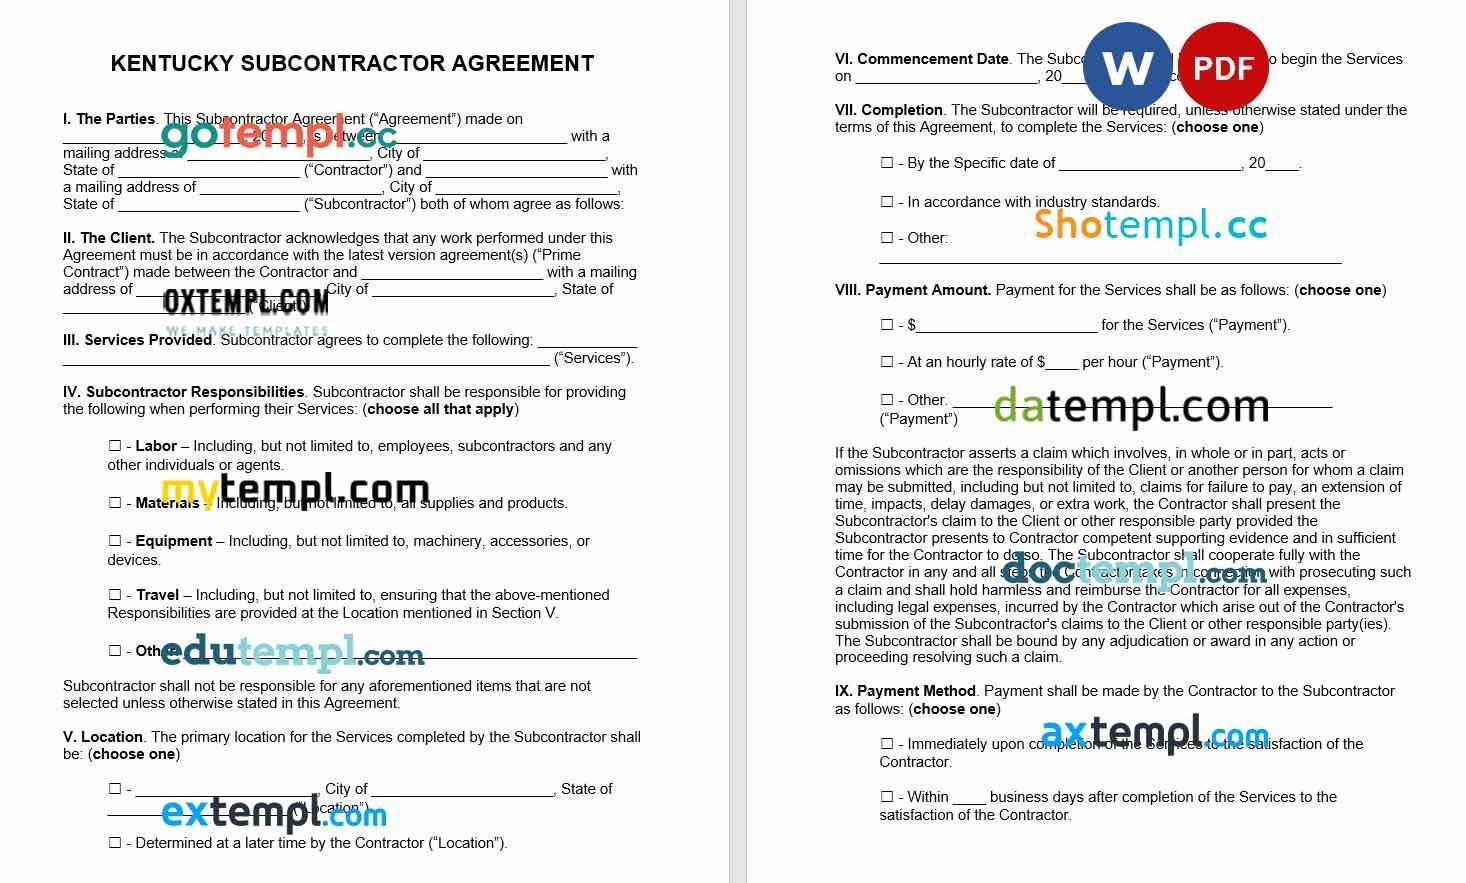 Kentucky Subcontractor Agreement Word example, fully aditable